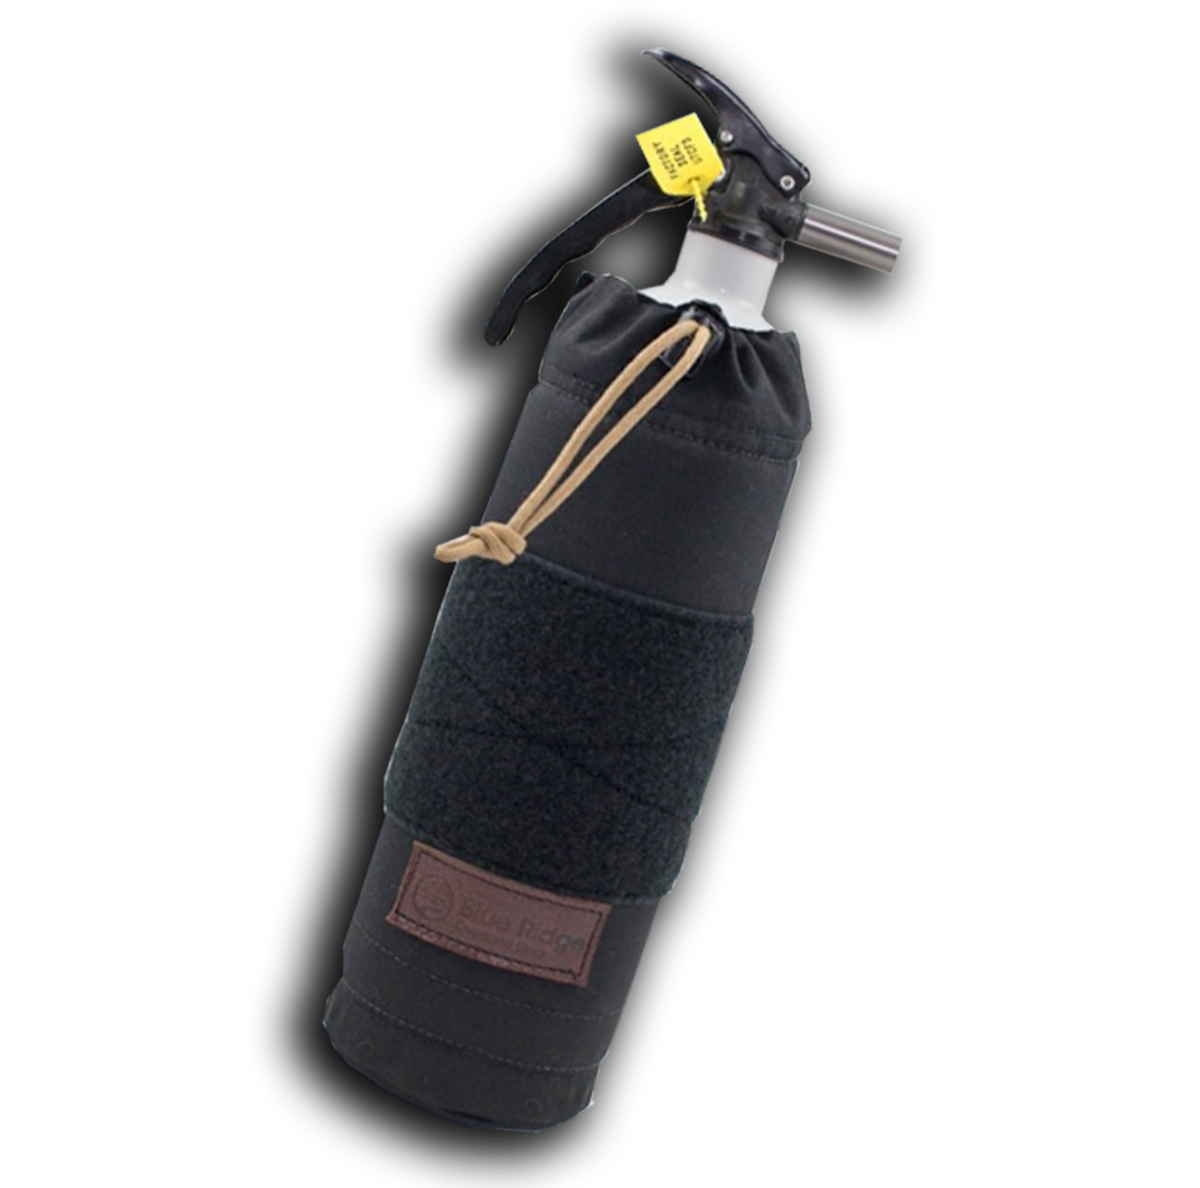 Fire Extinguisher MOLLE Pouch - Large by Blue Ridge Overland Gear